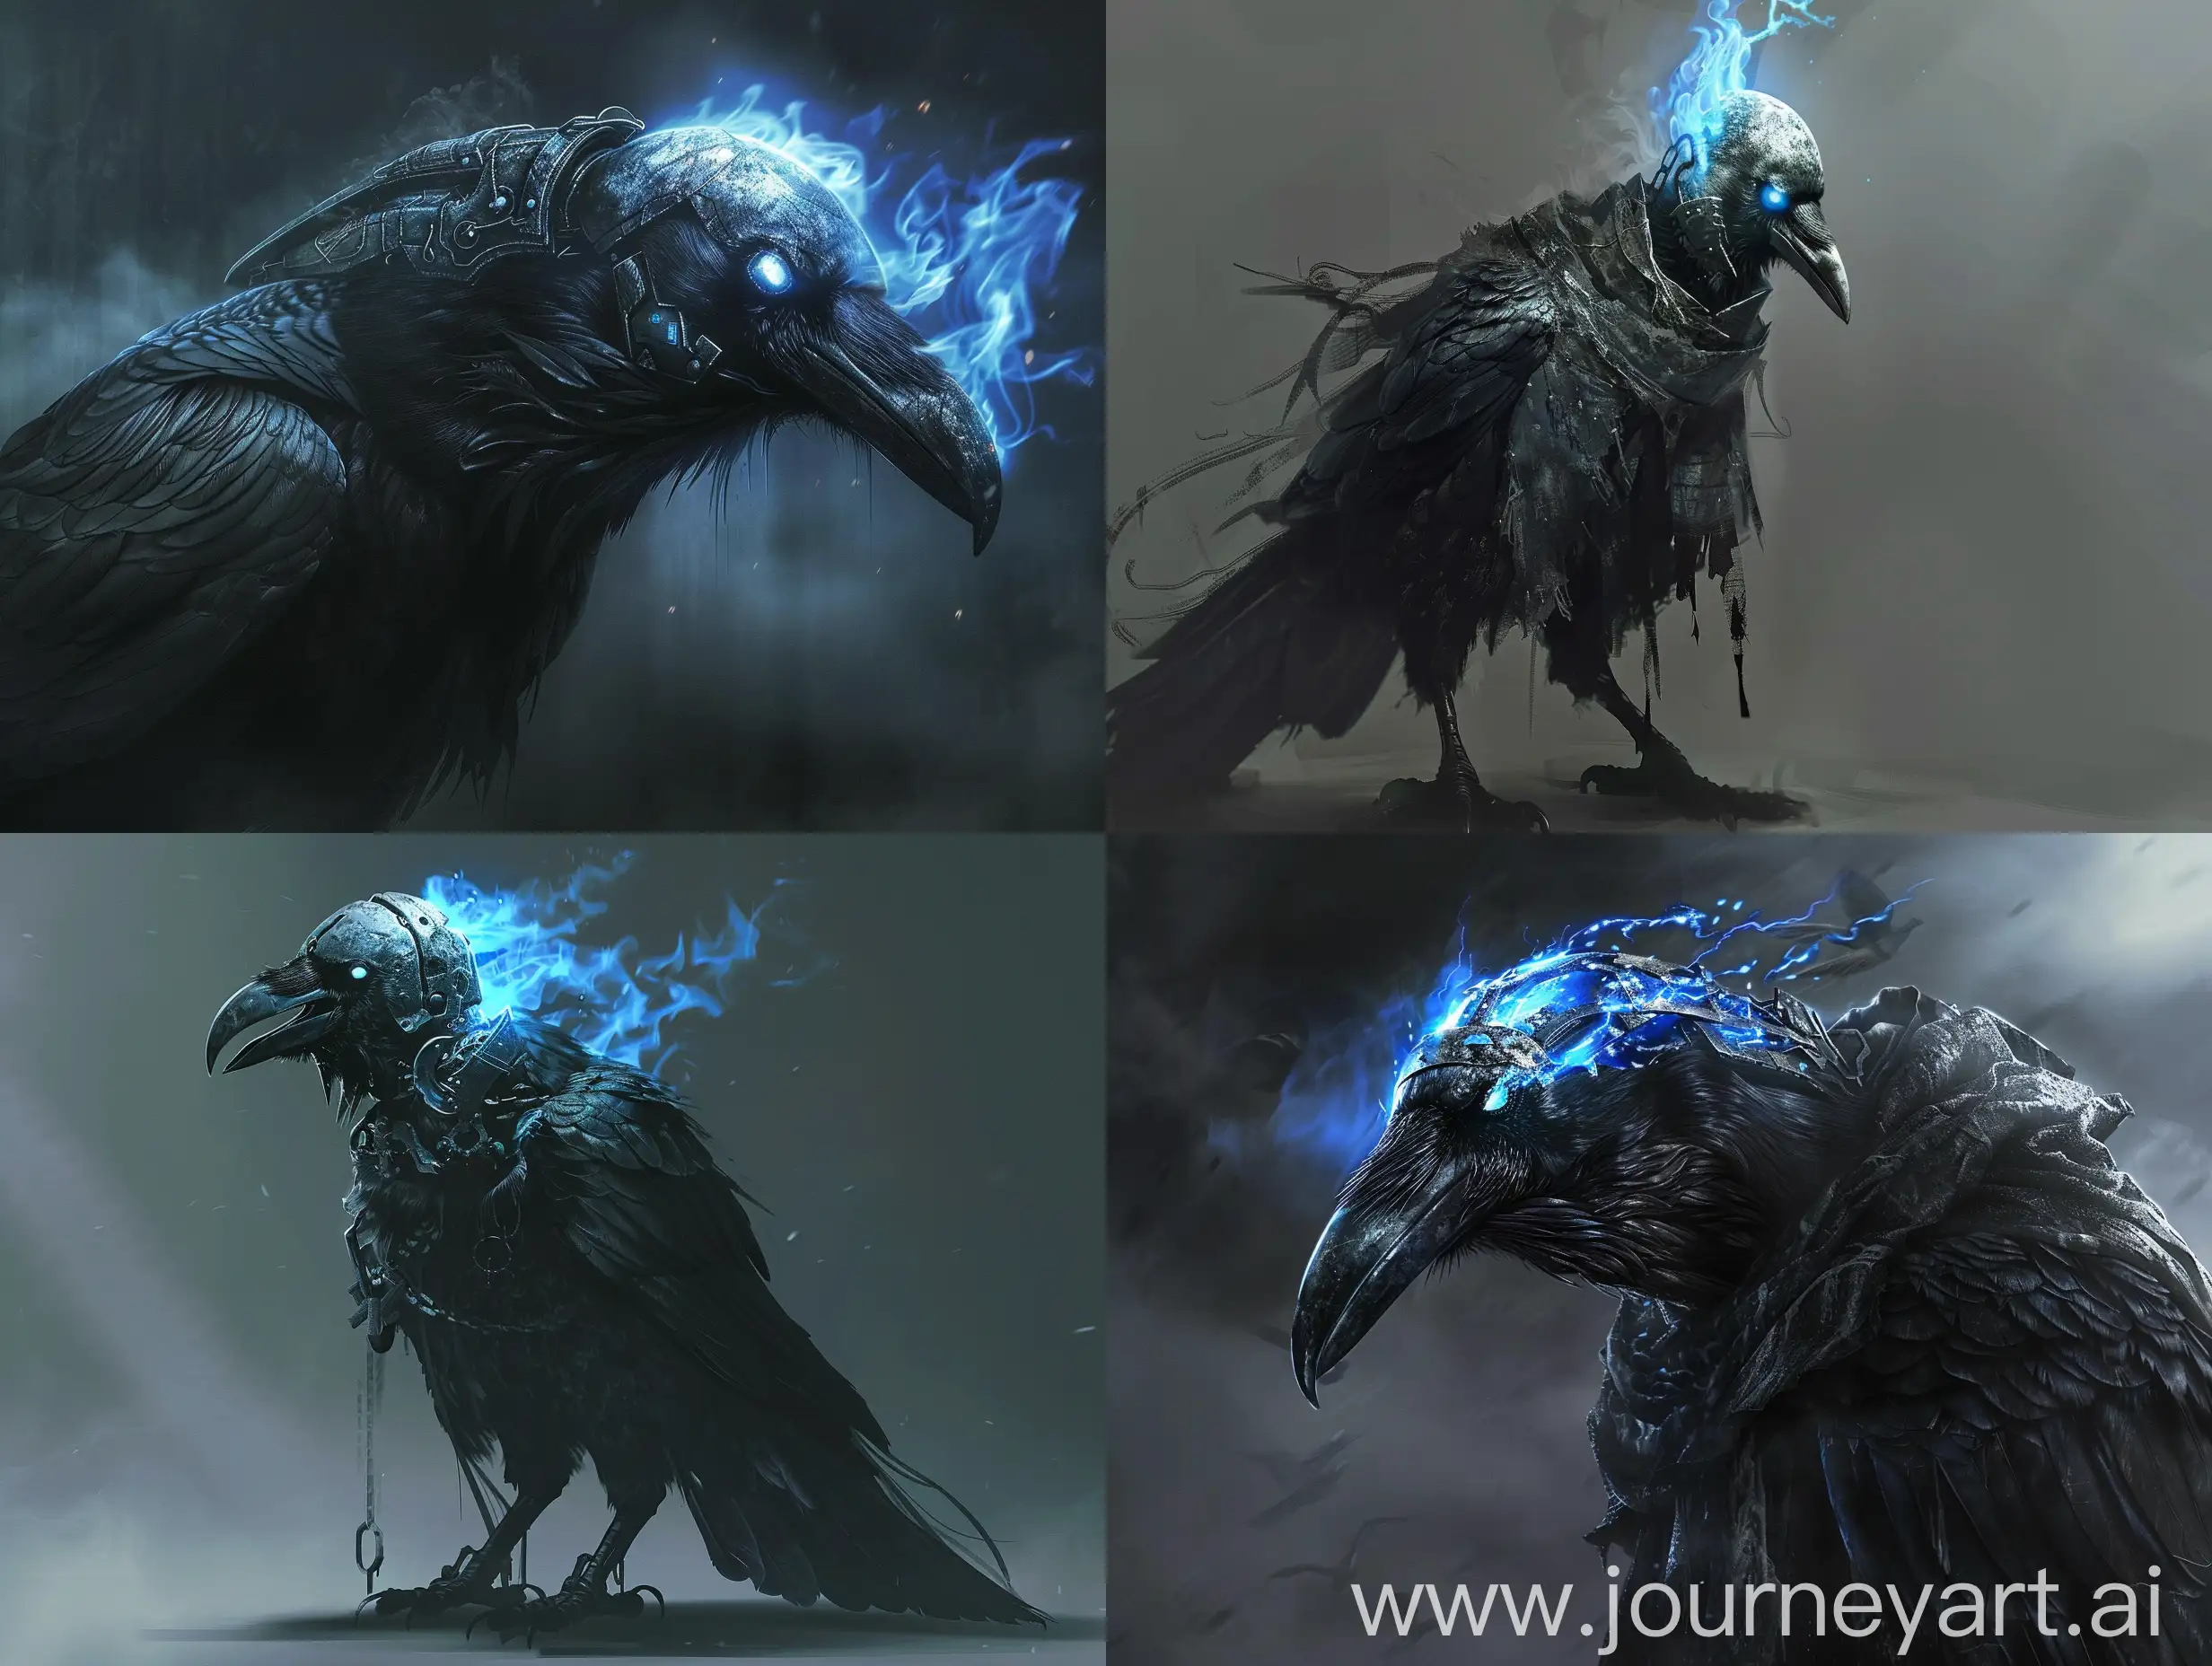  Boss for souls-like videogame, giant raven with metal head glowing with blue ghostly flame, dark fantasy, magic, epic. 